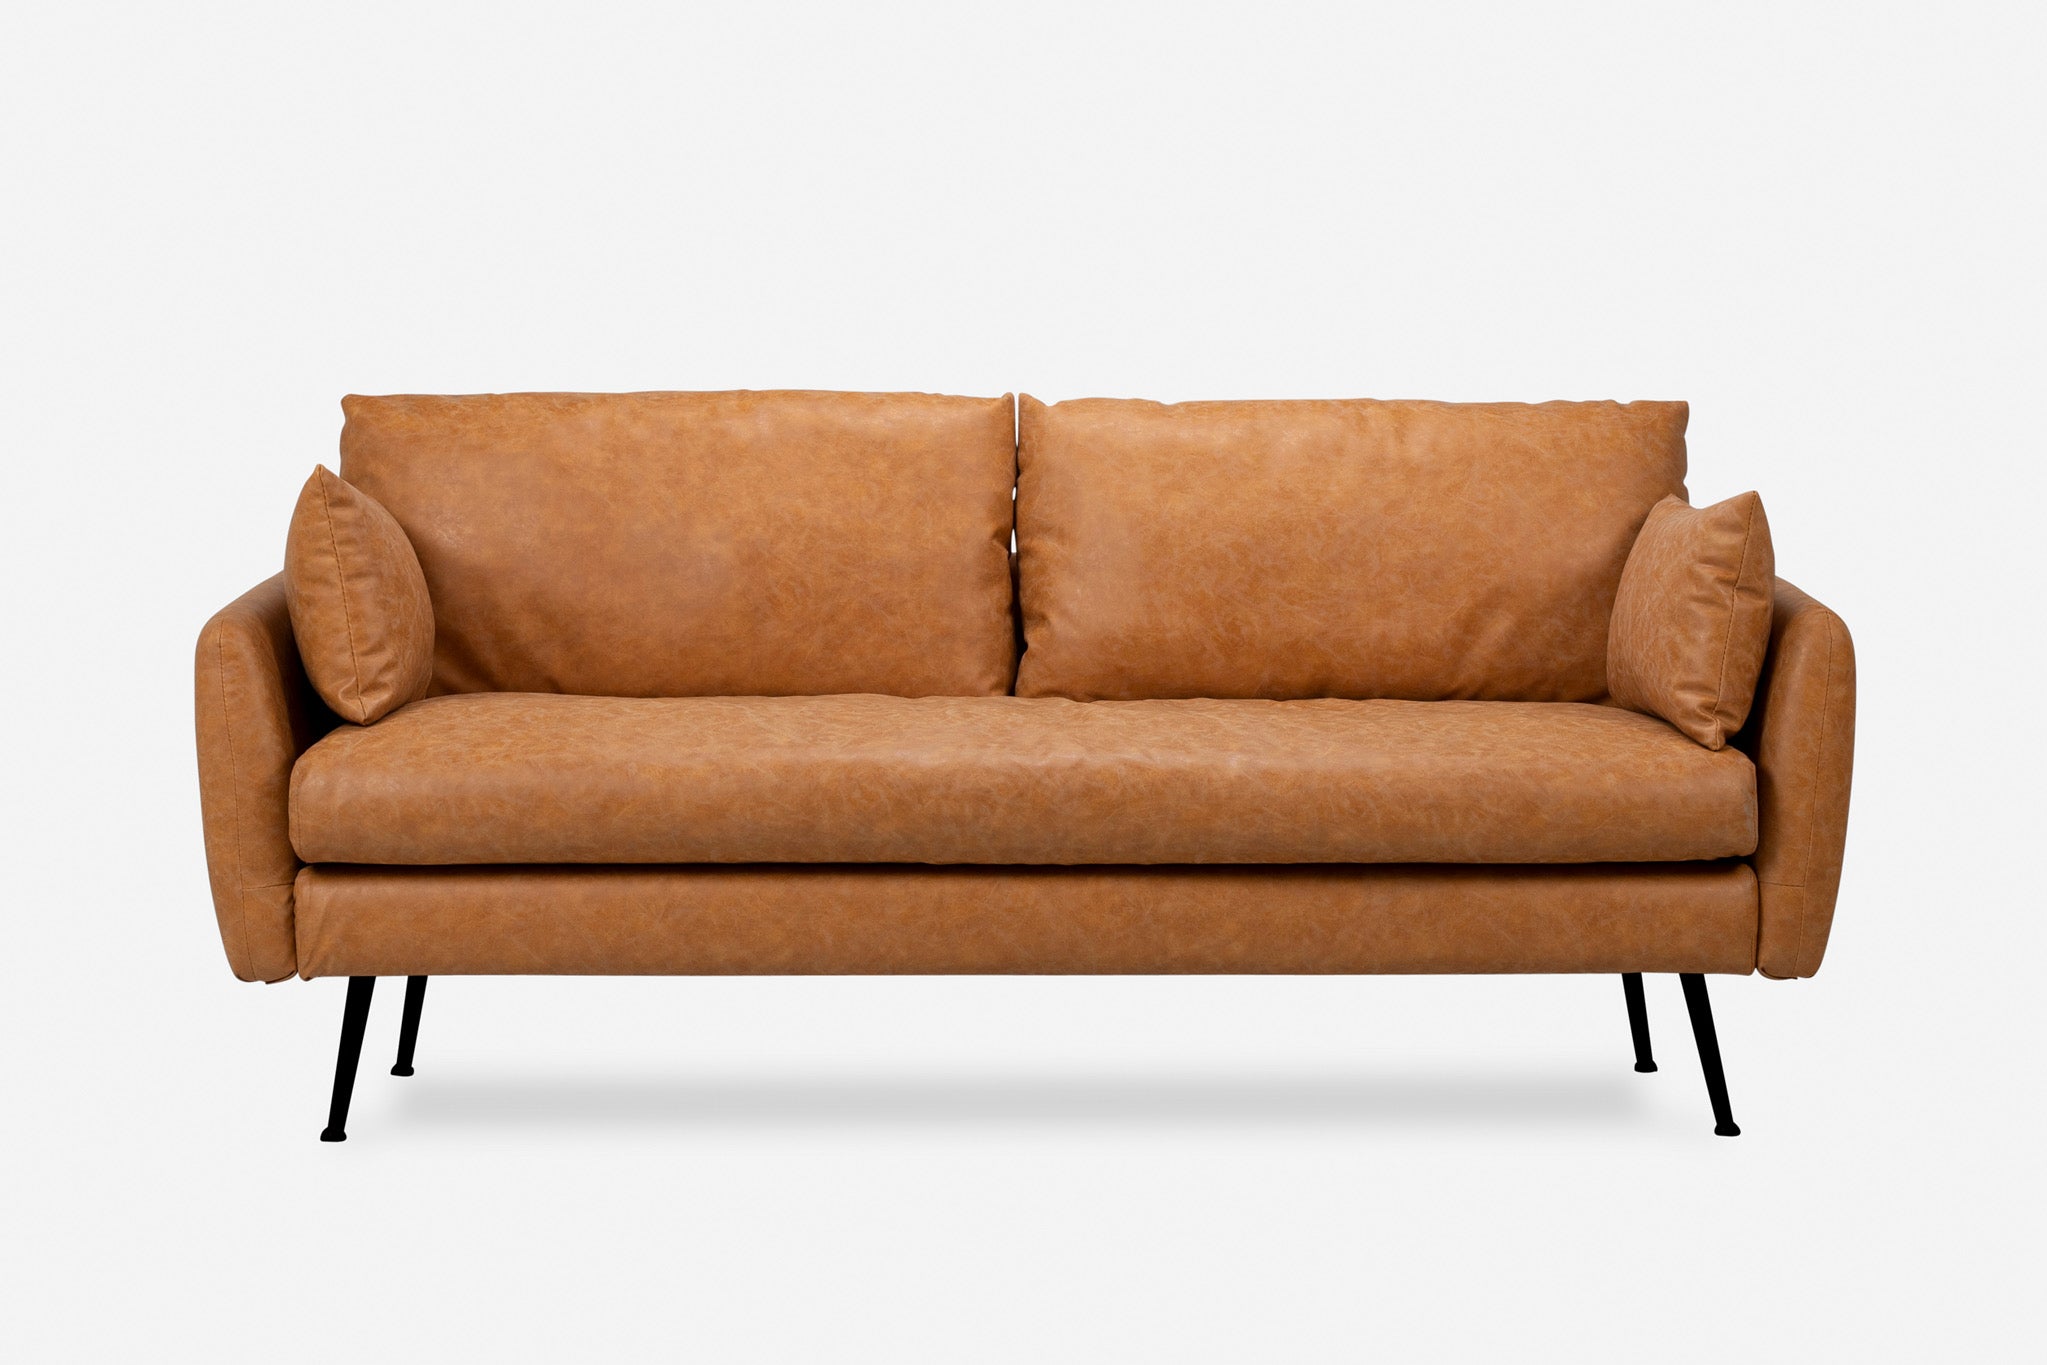 park sofa shown in distressed vegan leather with black legs